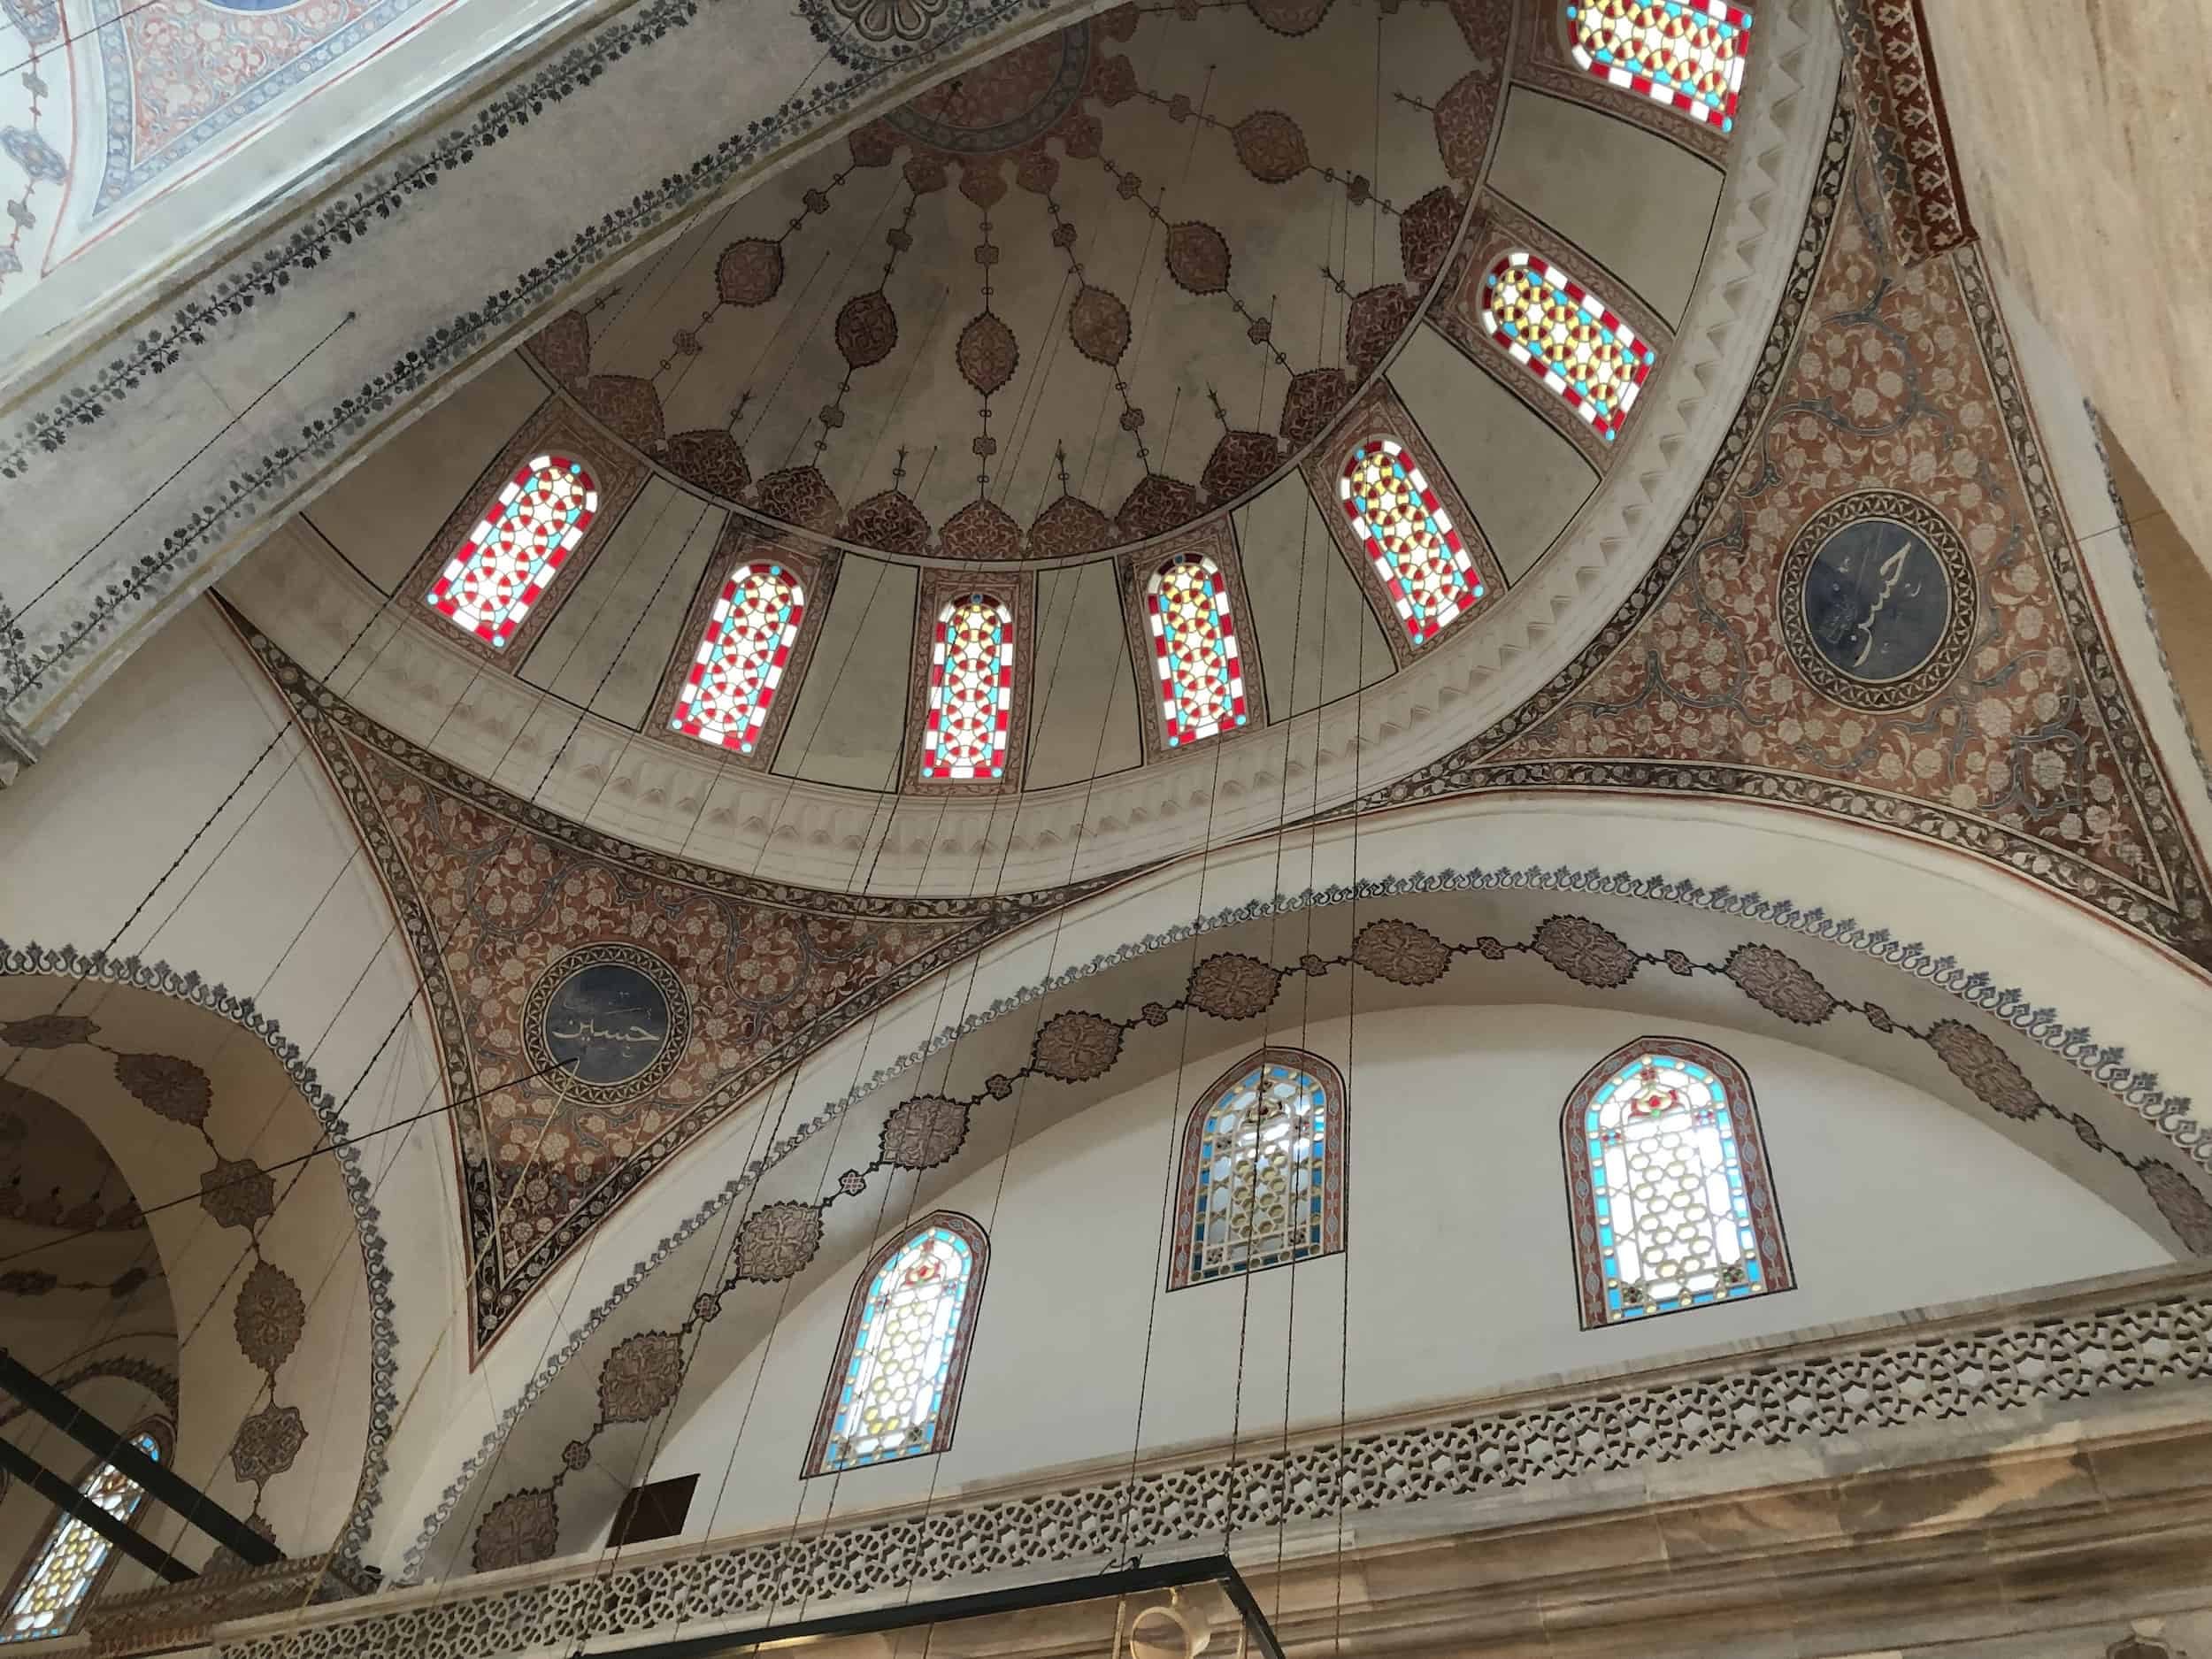 Semi-dome of the Bayezid II Mosque in Istanbul, Turkey